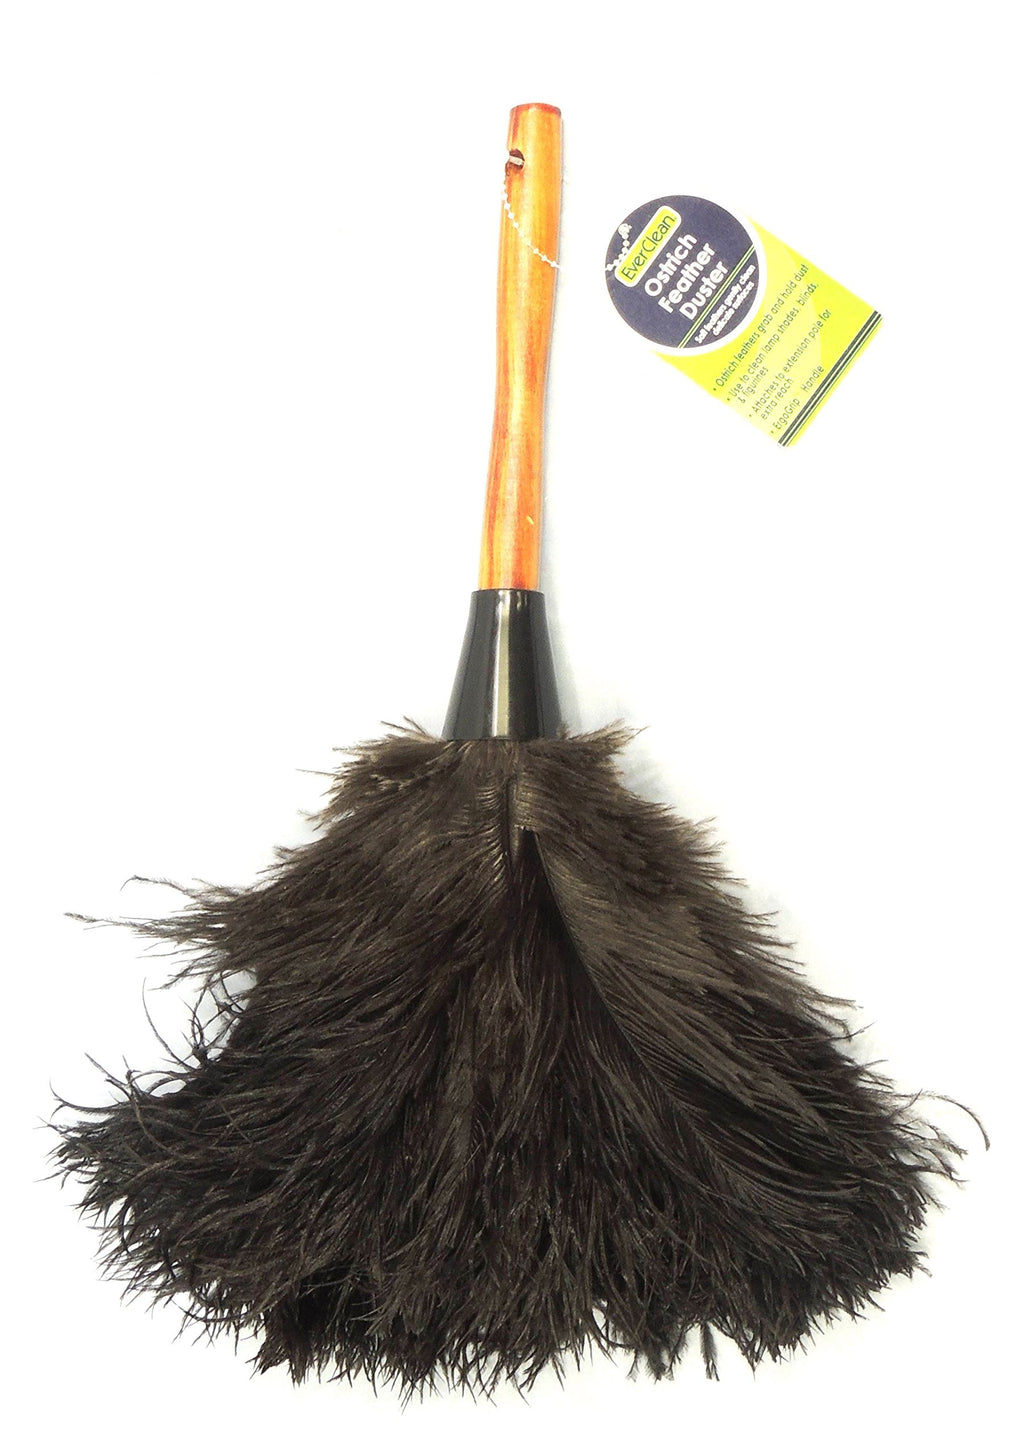 EVERCLEAN Ostrich Feather Duster Classic 14" 100% Natural Ostrich Feathers for Dusting Contoured, Intricate & Delicate Items - Classic Wood ErgoGrip Handle (6049.0)